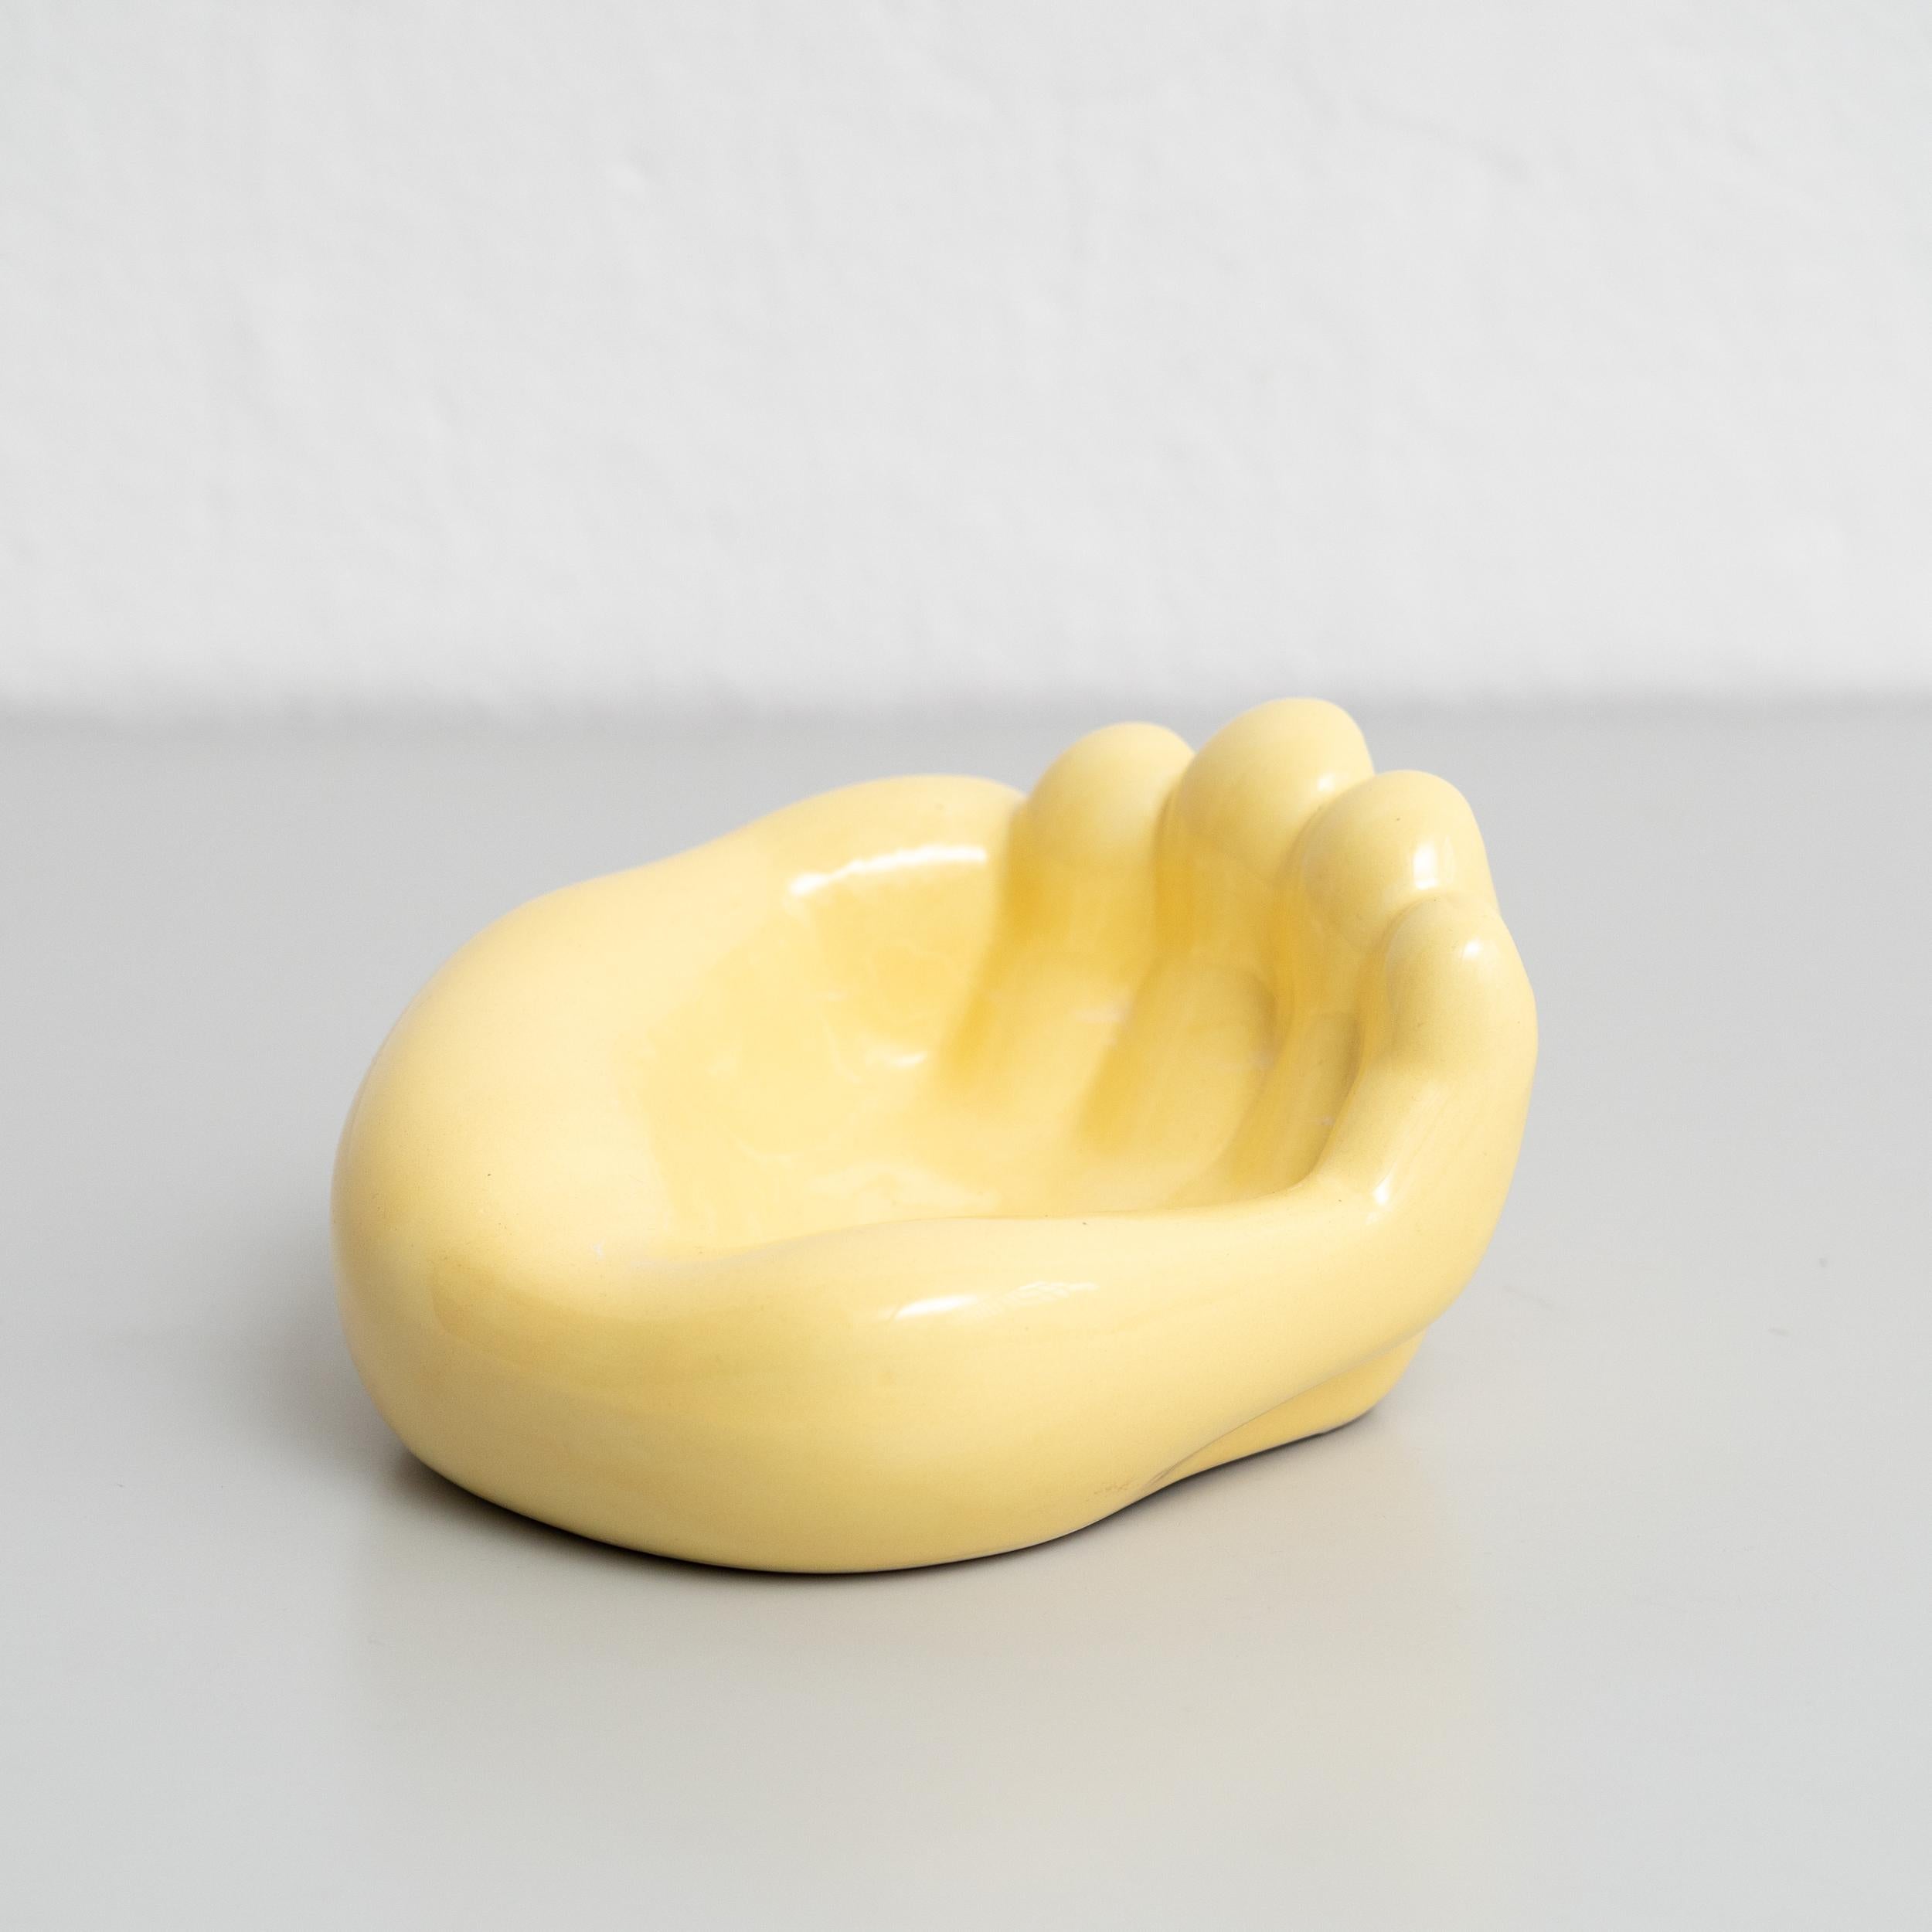 Mid-Century Modern Ashtray After Georges Jouve Ceramic in Yellow, circa 1950 For Sale